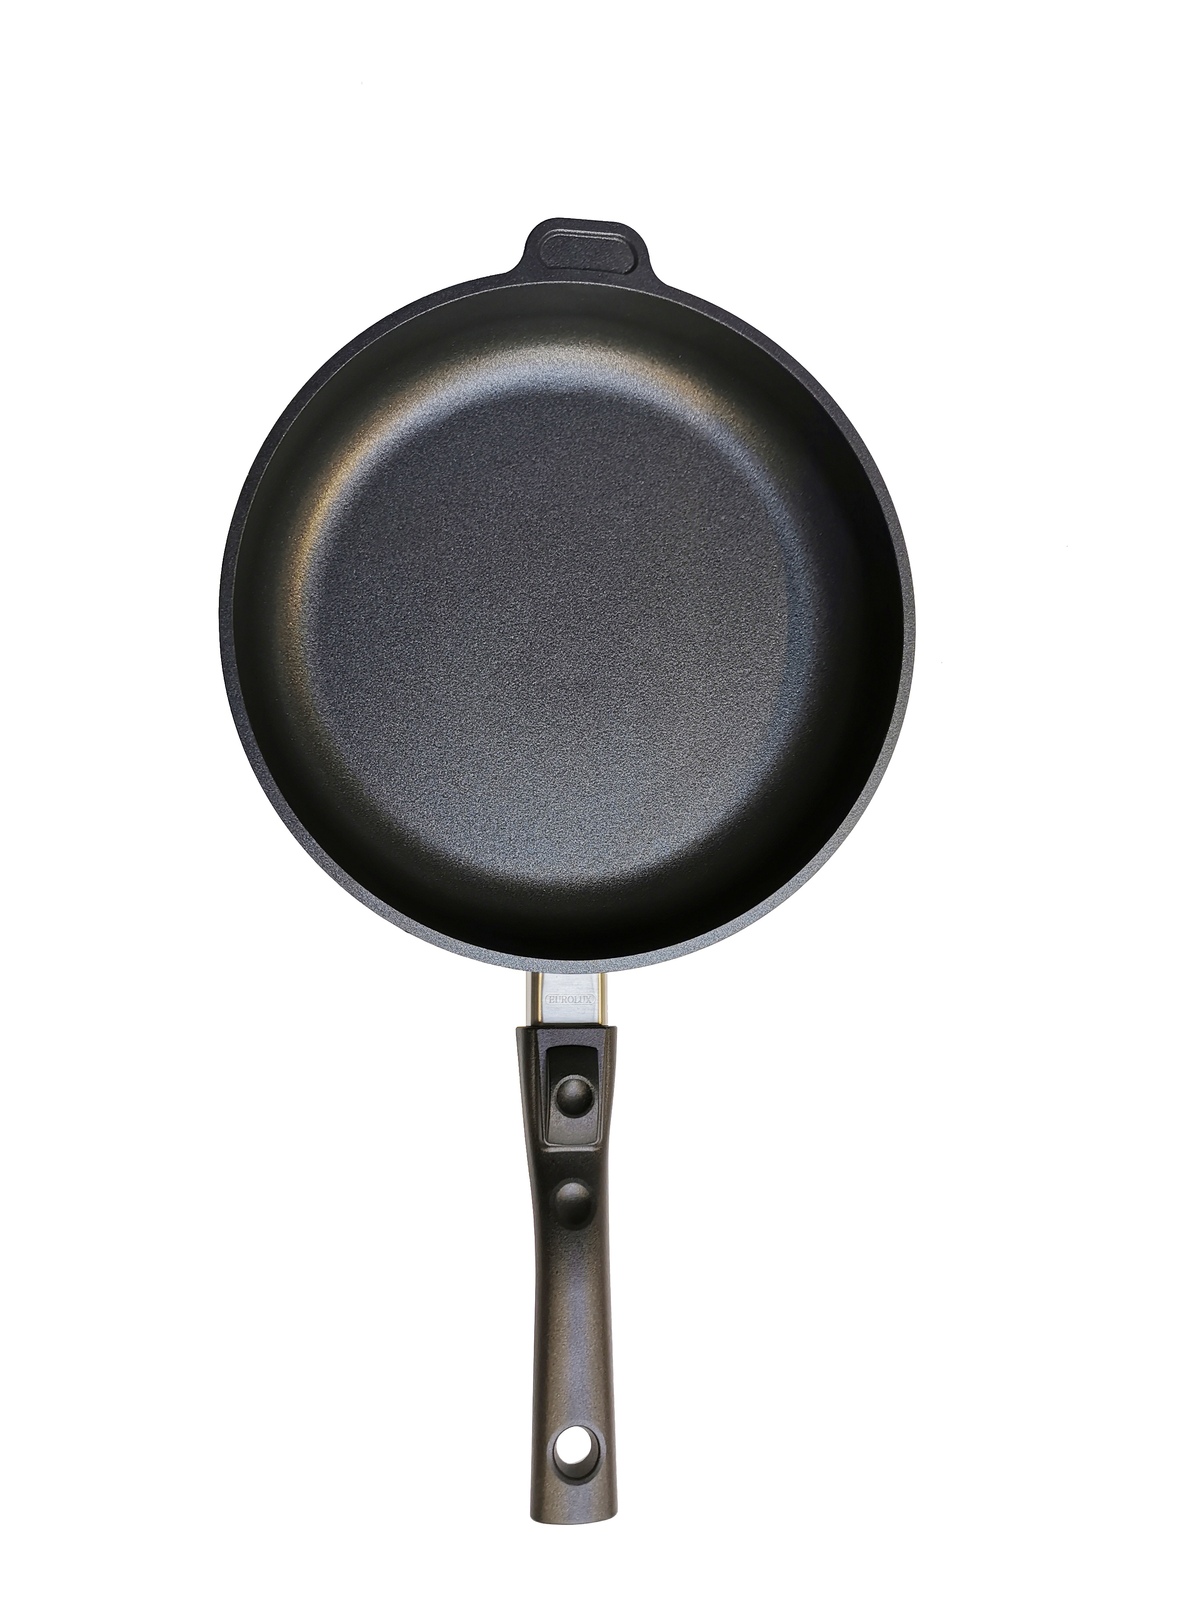 Frying pan induction 20 x 5cm high with detachable handle &oven-proof glass lid